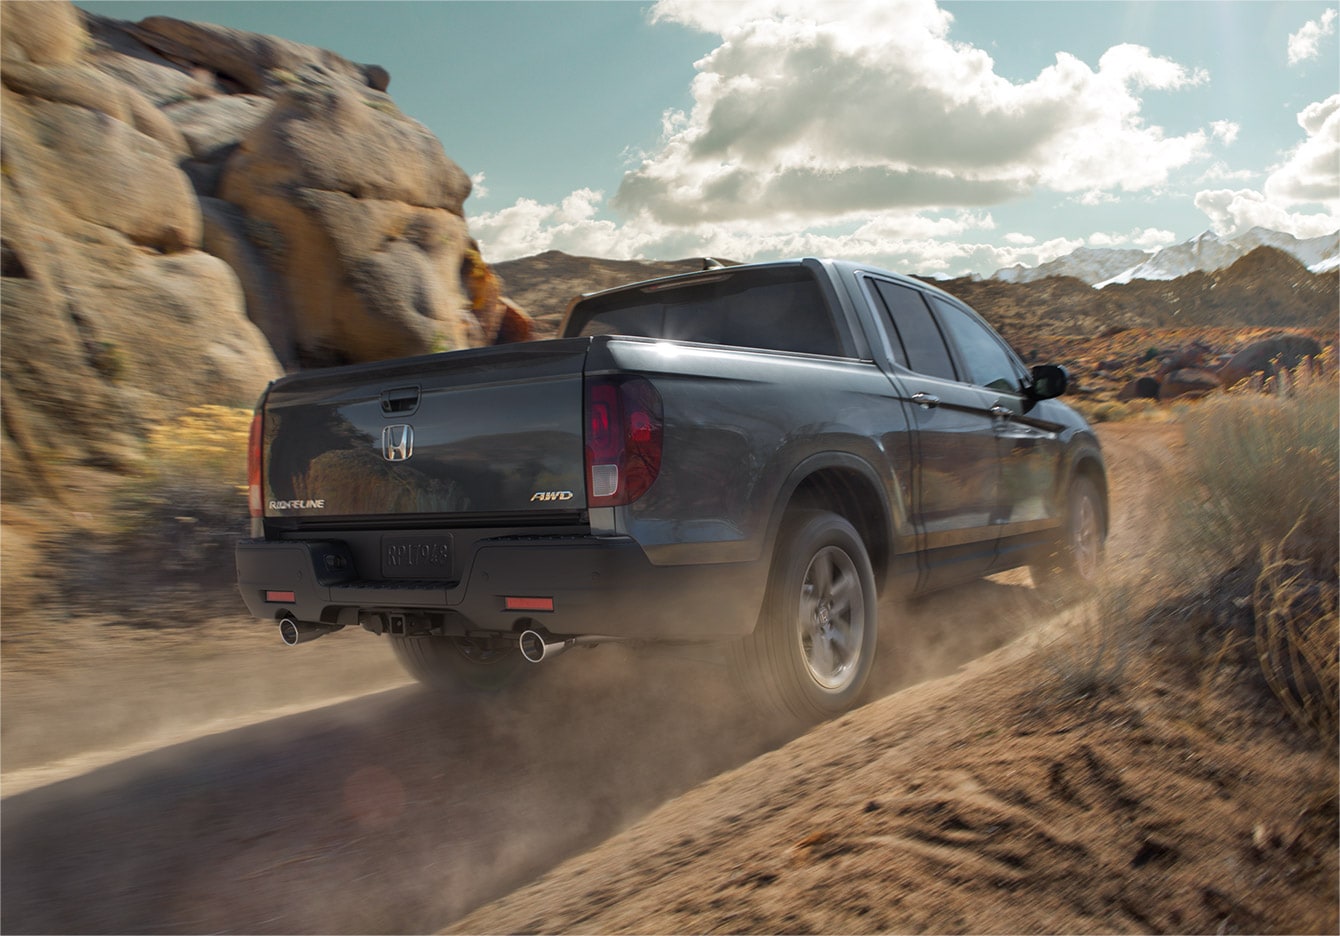  Get a new or used Honda Ridgeline truck from your local dealership Louisville Honda World in Forest Hills, Kentucky.